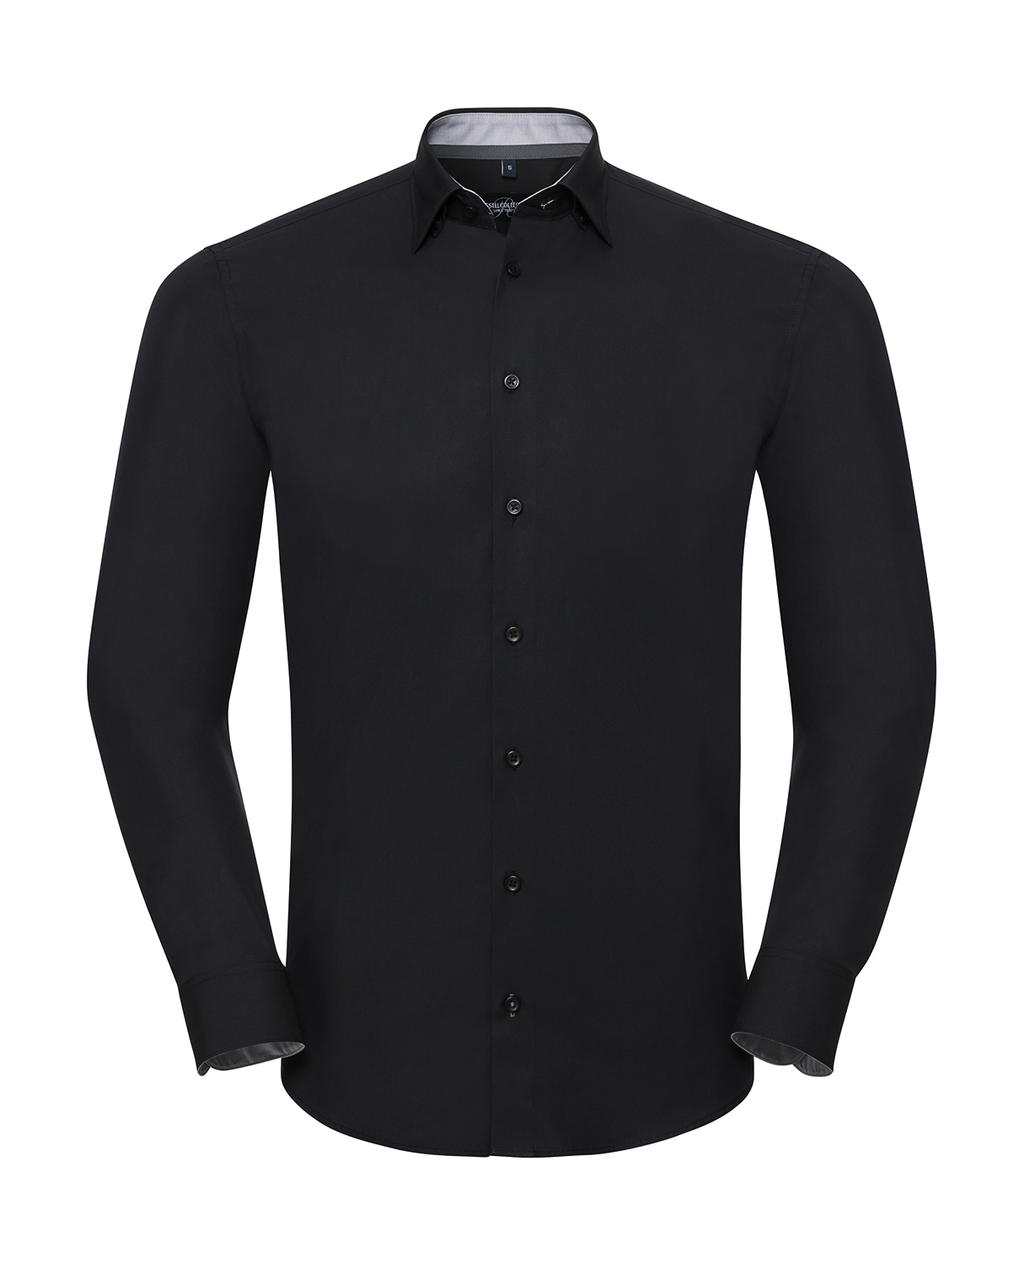  Mens LS Tailored Contrast Ultimate Stretch Shirt in Farbe Black/Oxford Grey/Convoy Grey